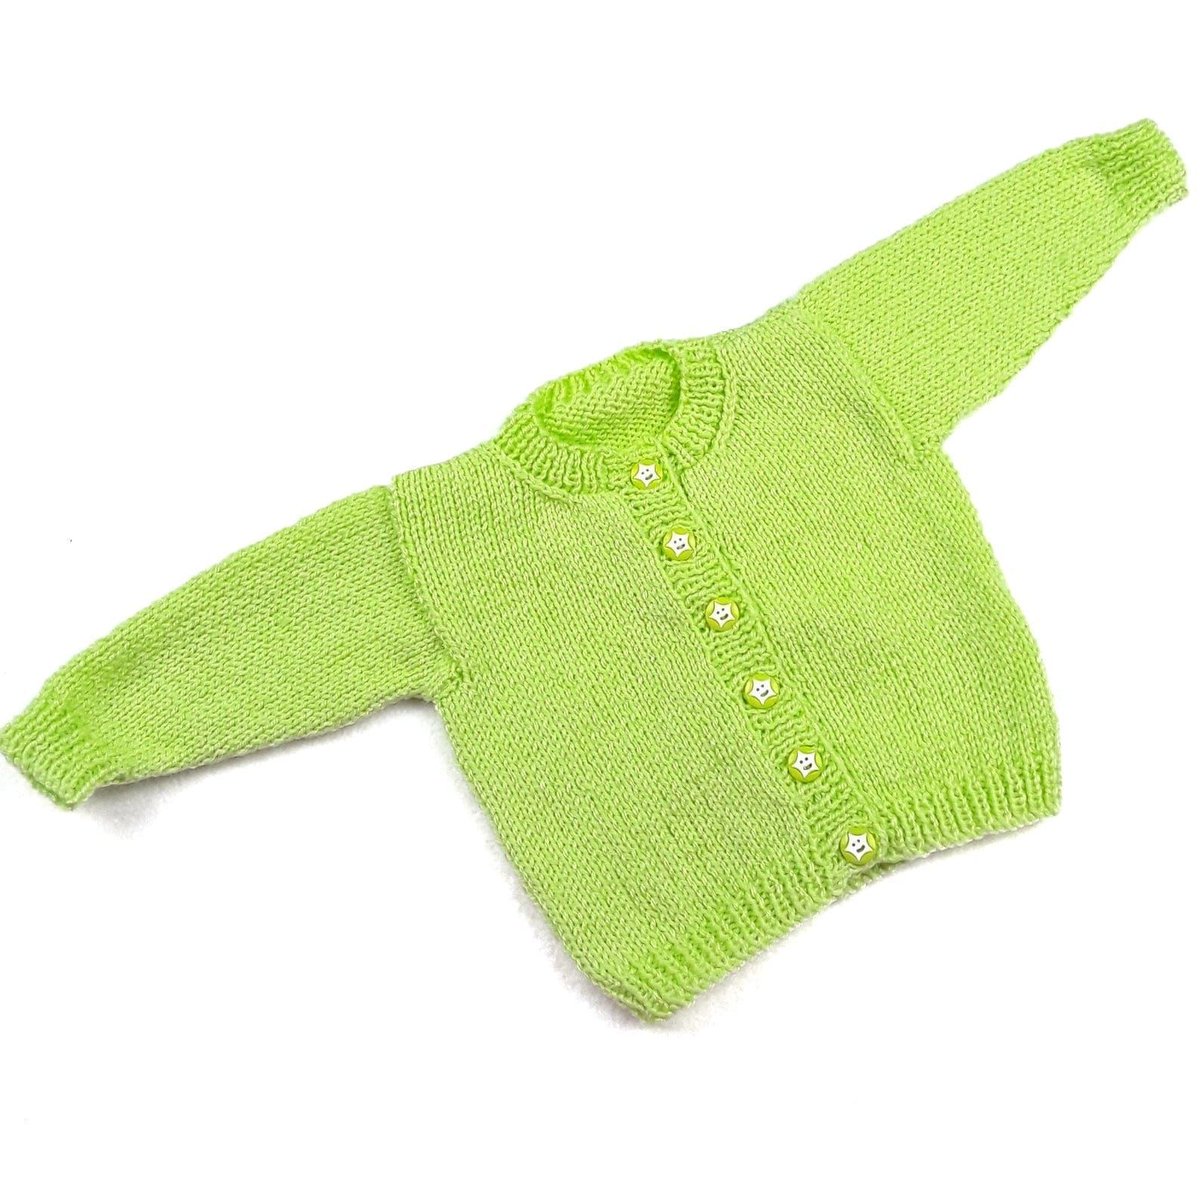 Keep your baby warm and stylish with this hand-knitted lime green cardigan! Perfect for both boys and girls aged 0-3 months. Shop now on #Etsy: knittingtopia.etsy.com/listing/168701… #KnittedBabyclothes #knittingtopia #craftbizparty #MHHSBD #babyessentials #shophandmade #buybritish